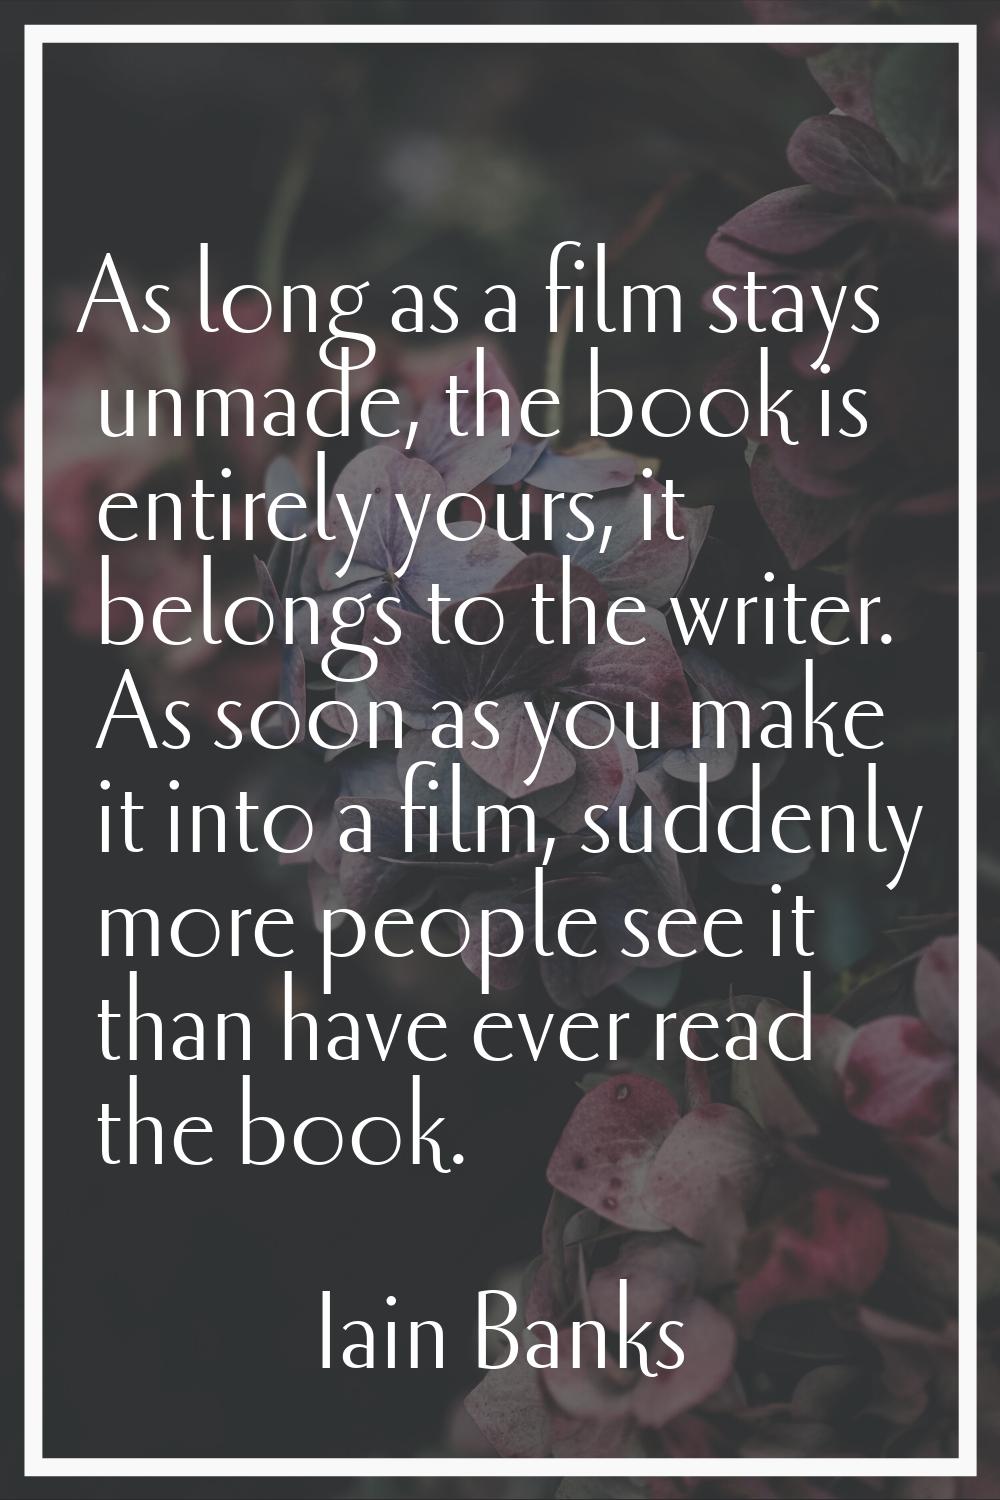 As long as a film stays unmade, the book is entirely yours, it belongs to the writer. As soon as yo